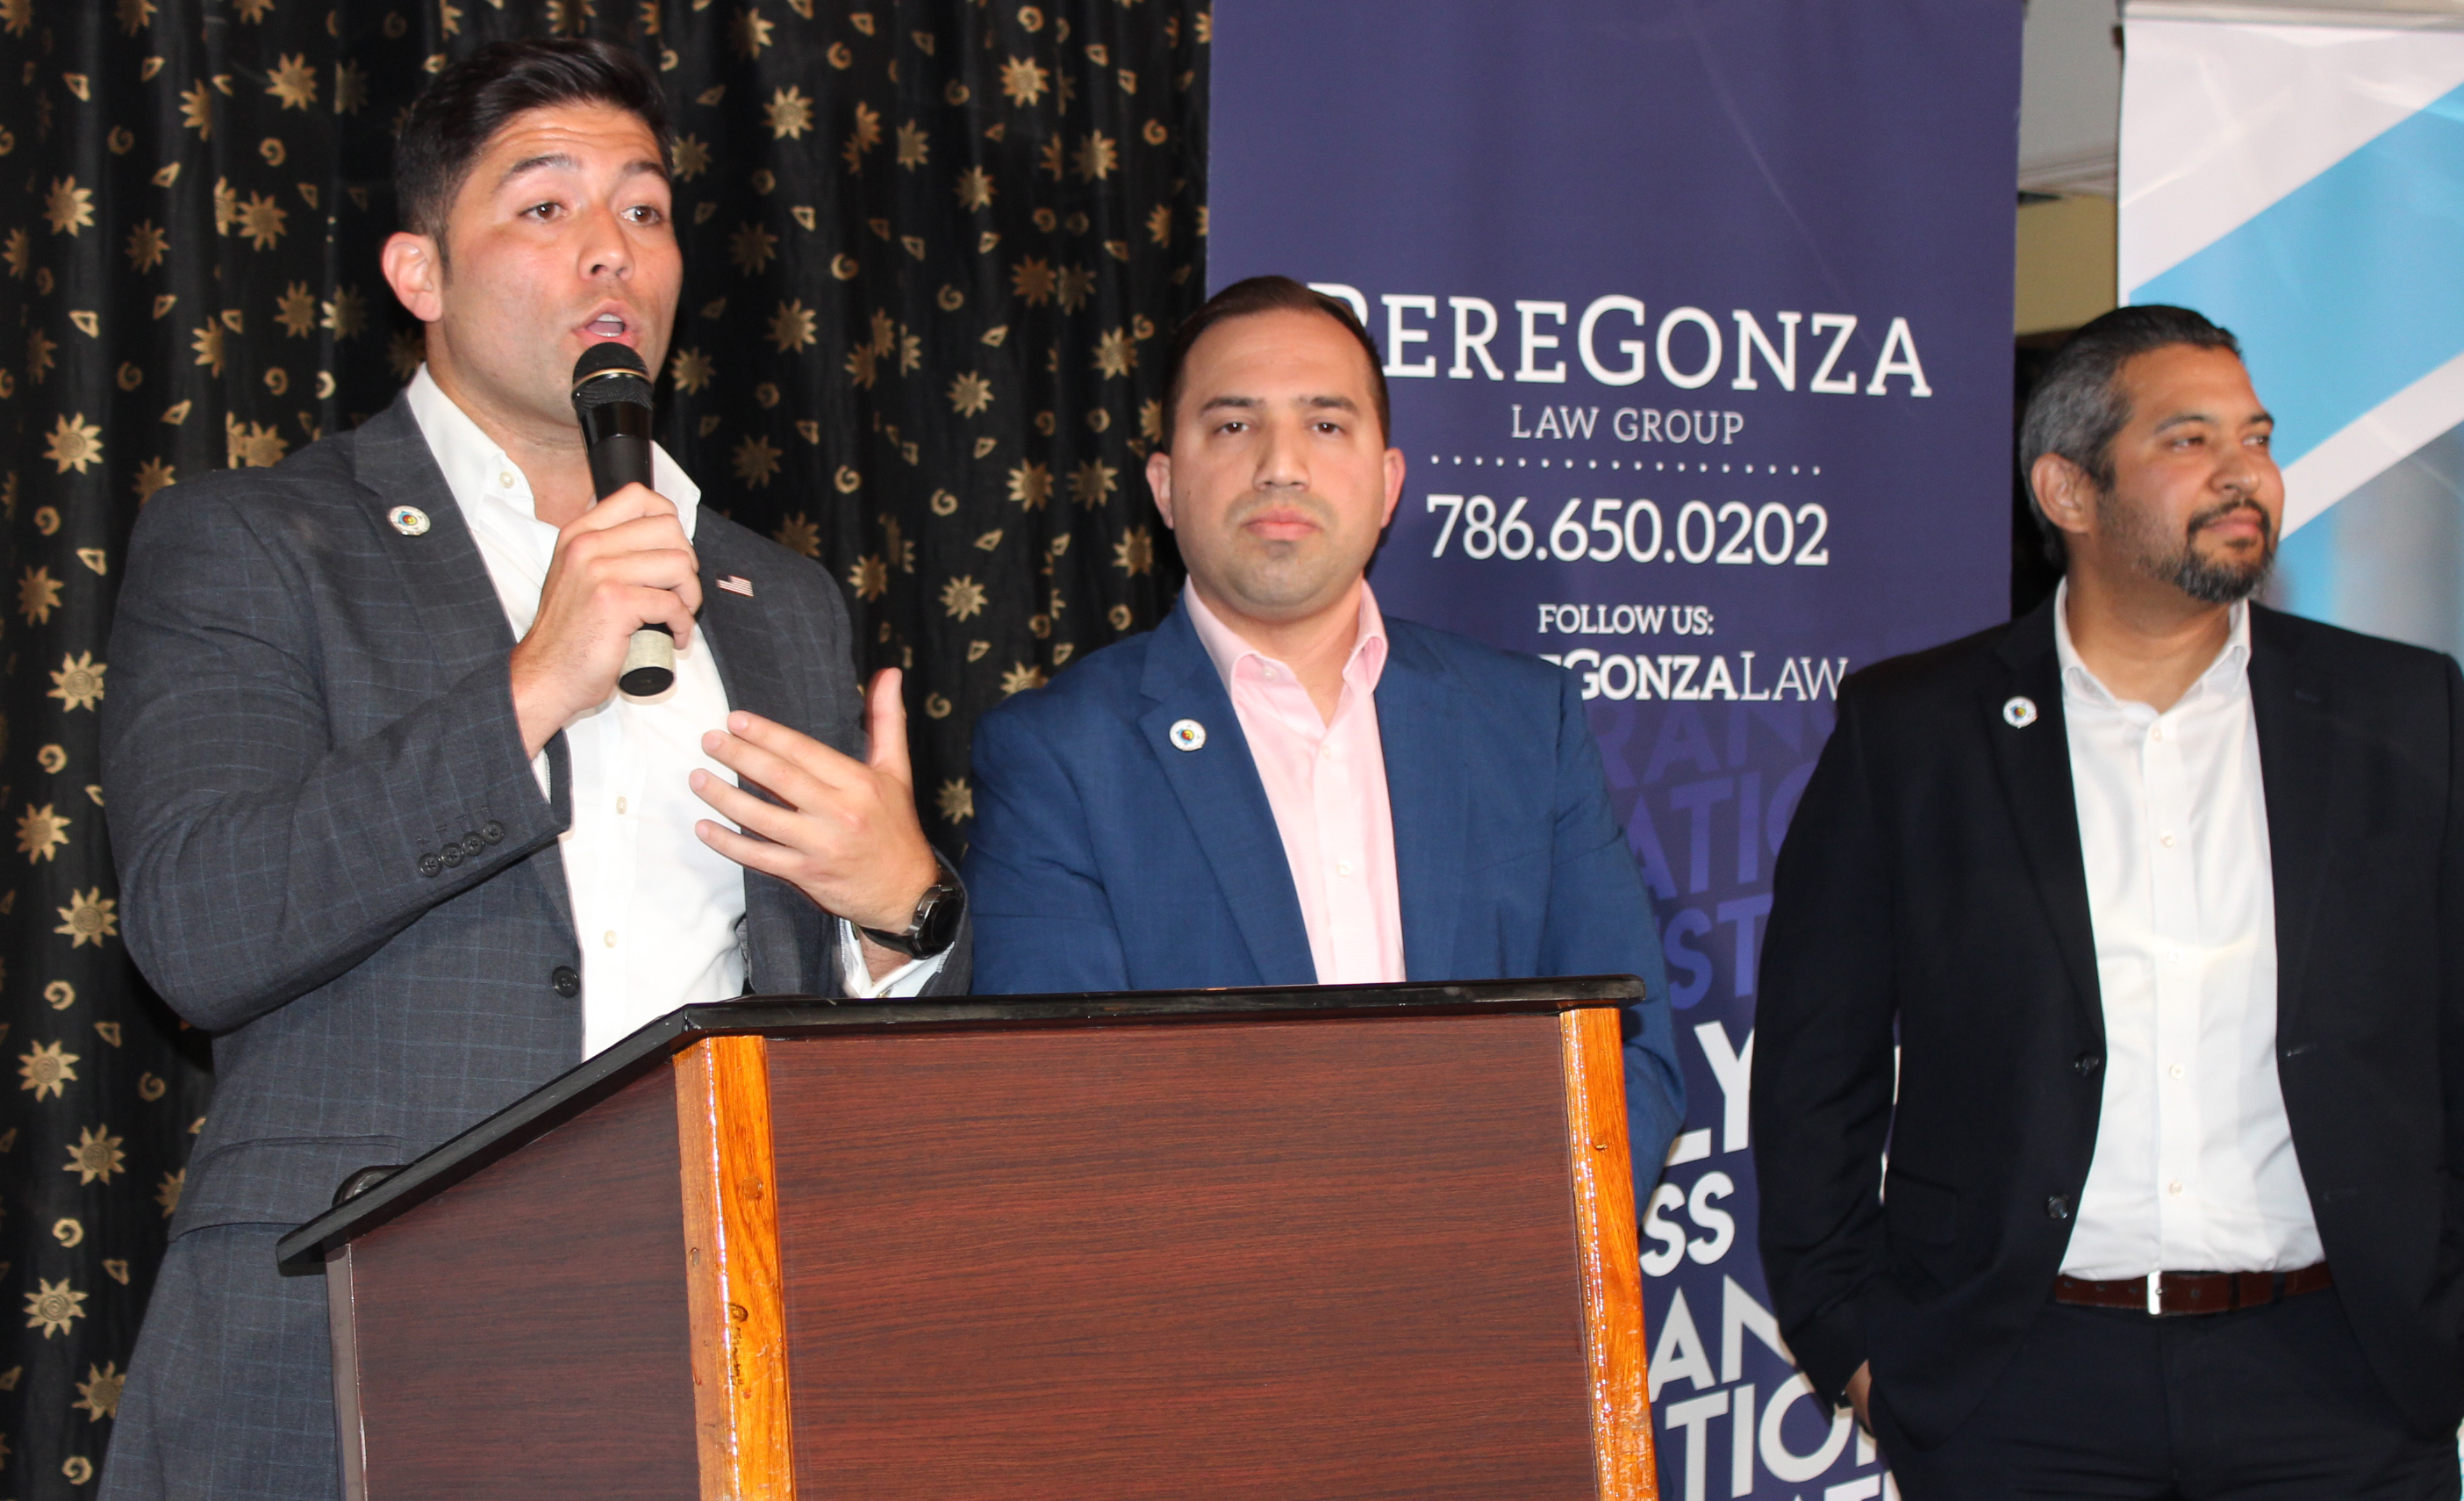 Doral Chamber of Commerce Carnival Cruise Luncheon 2019, Networking Event in Miami, Florida. PereGonza Law Group talking on stage, Robert Gonzalez.